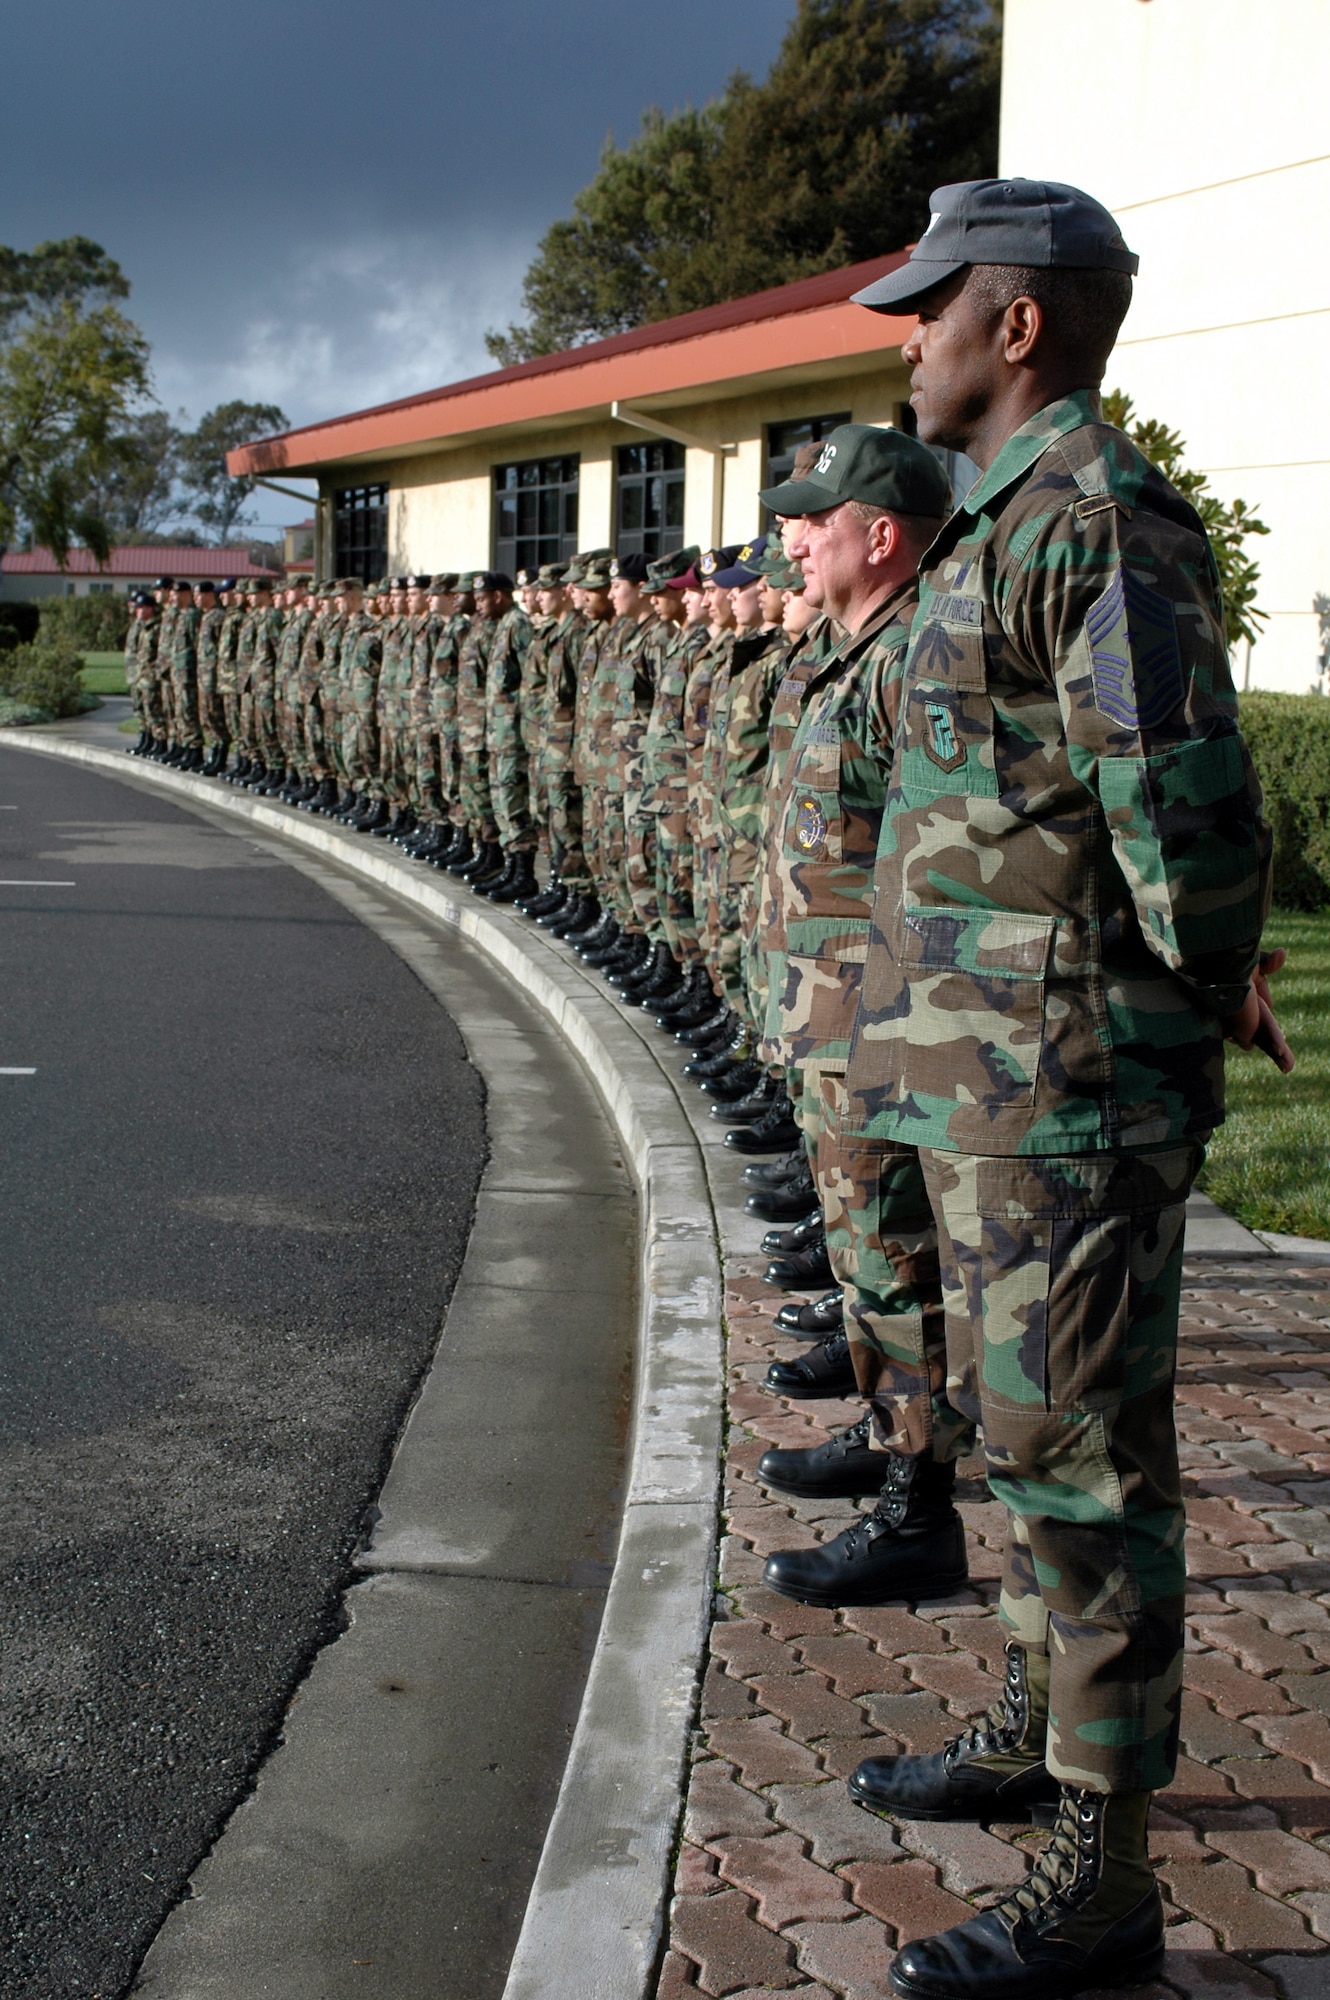 Chief Master Sgt. Brye McMillion stands in parade rest with first-term Airmen before a retreat ceremony at Bldg. 51. (U.S. Air Force photo by Staff Sgt. Matt McGovern)
